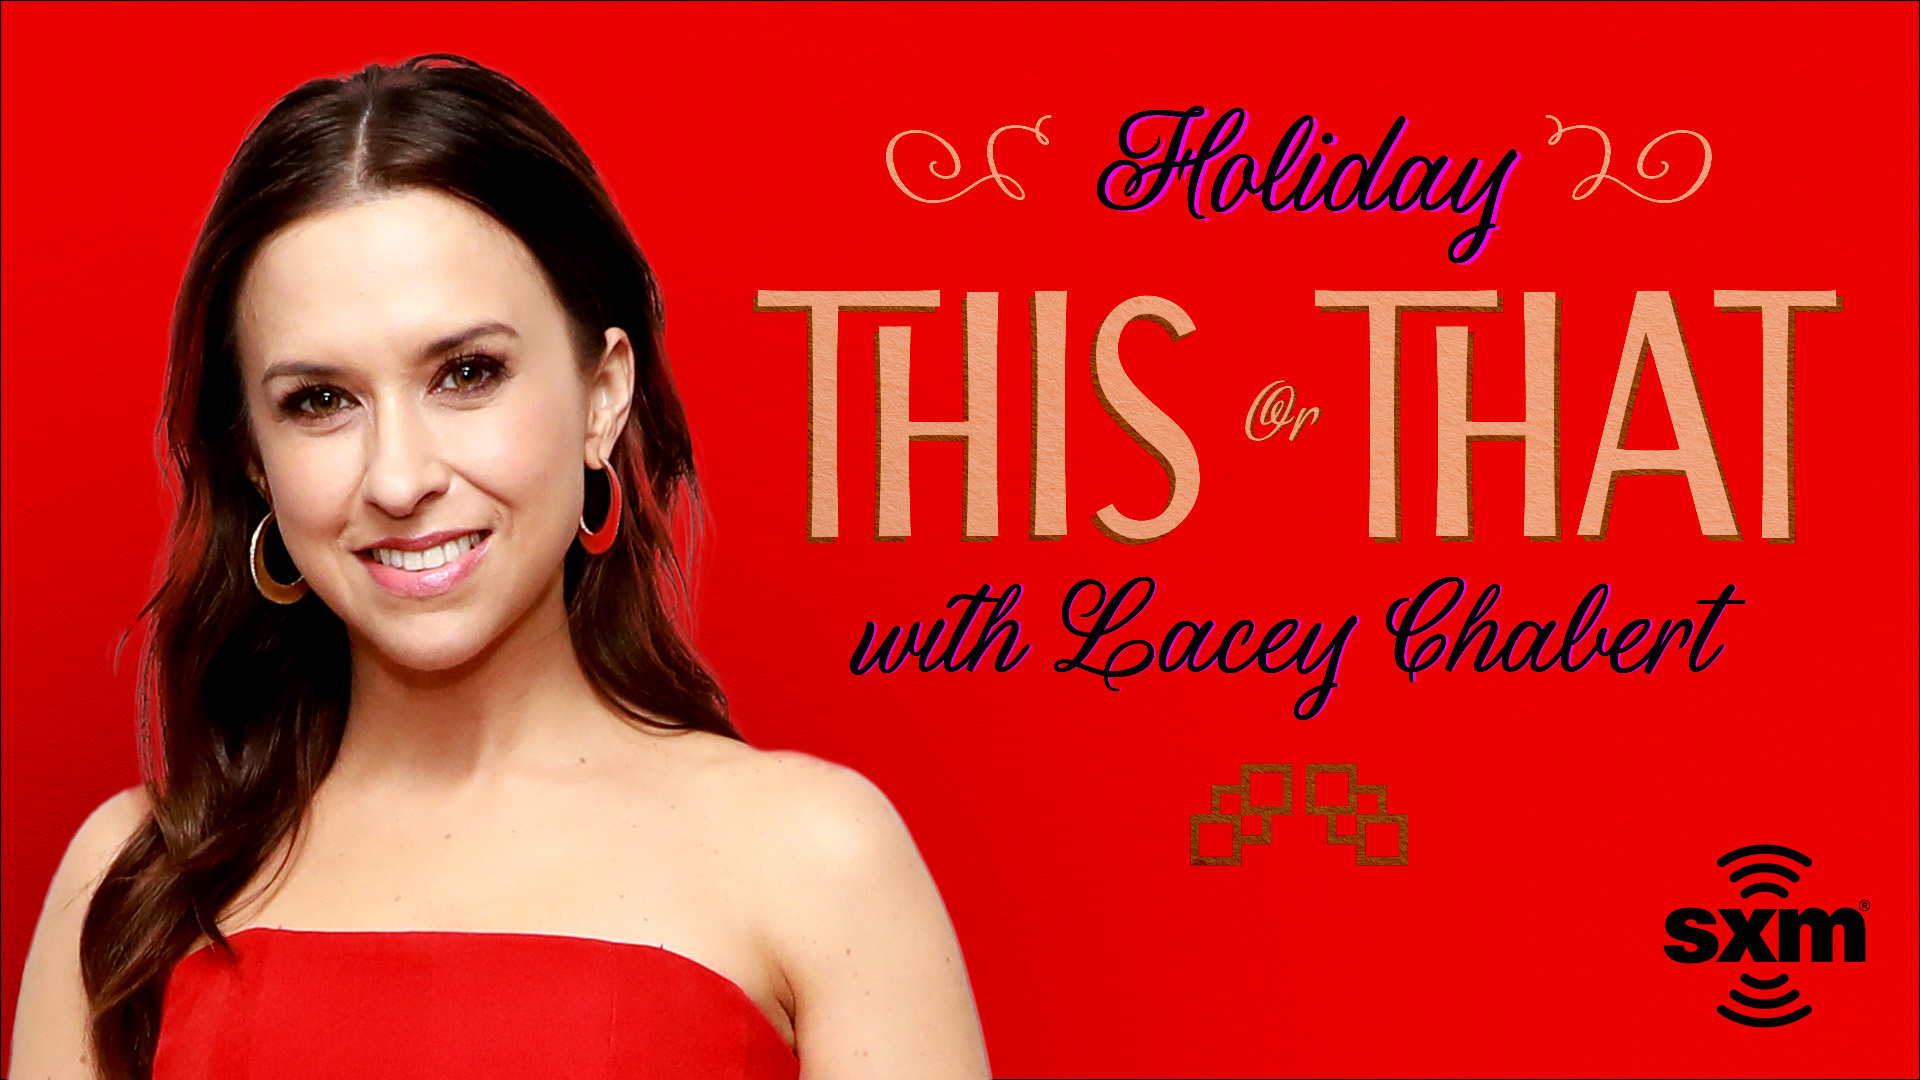 Holiday This or That with Lacey Chabert